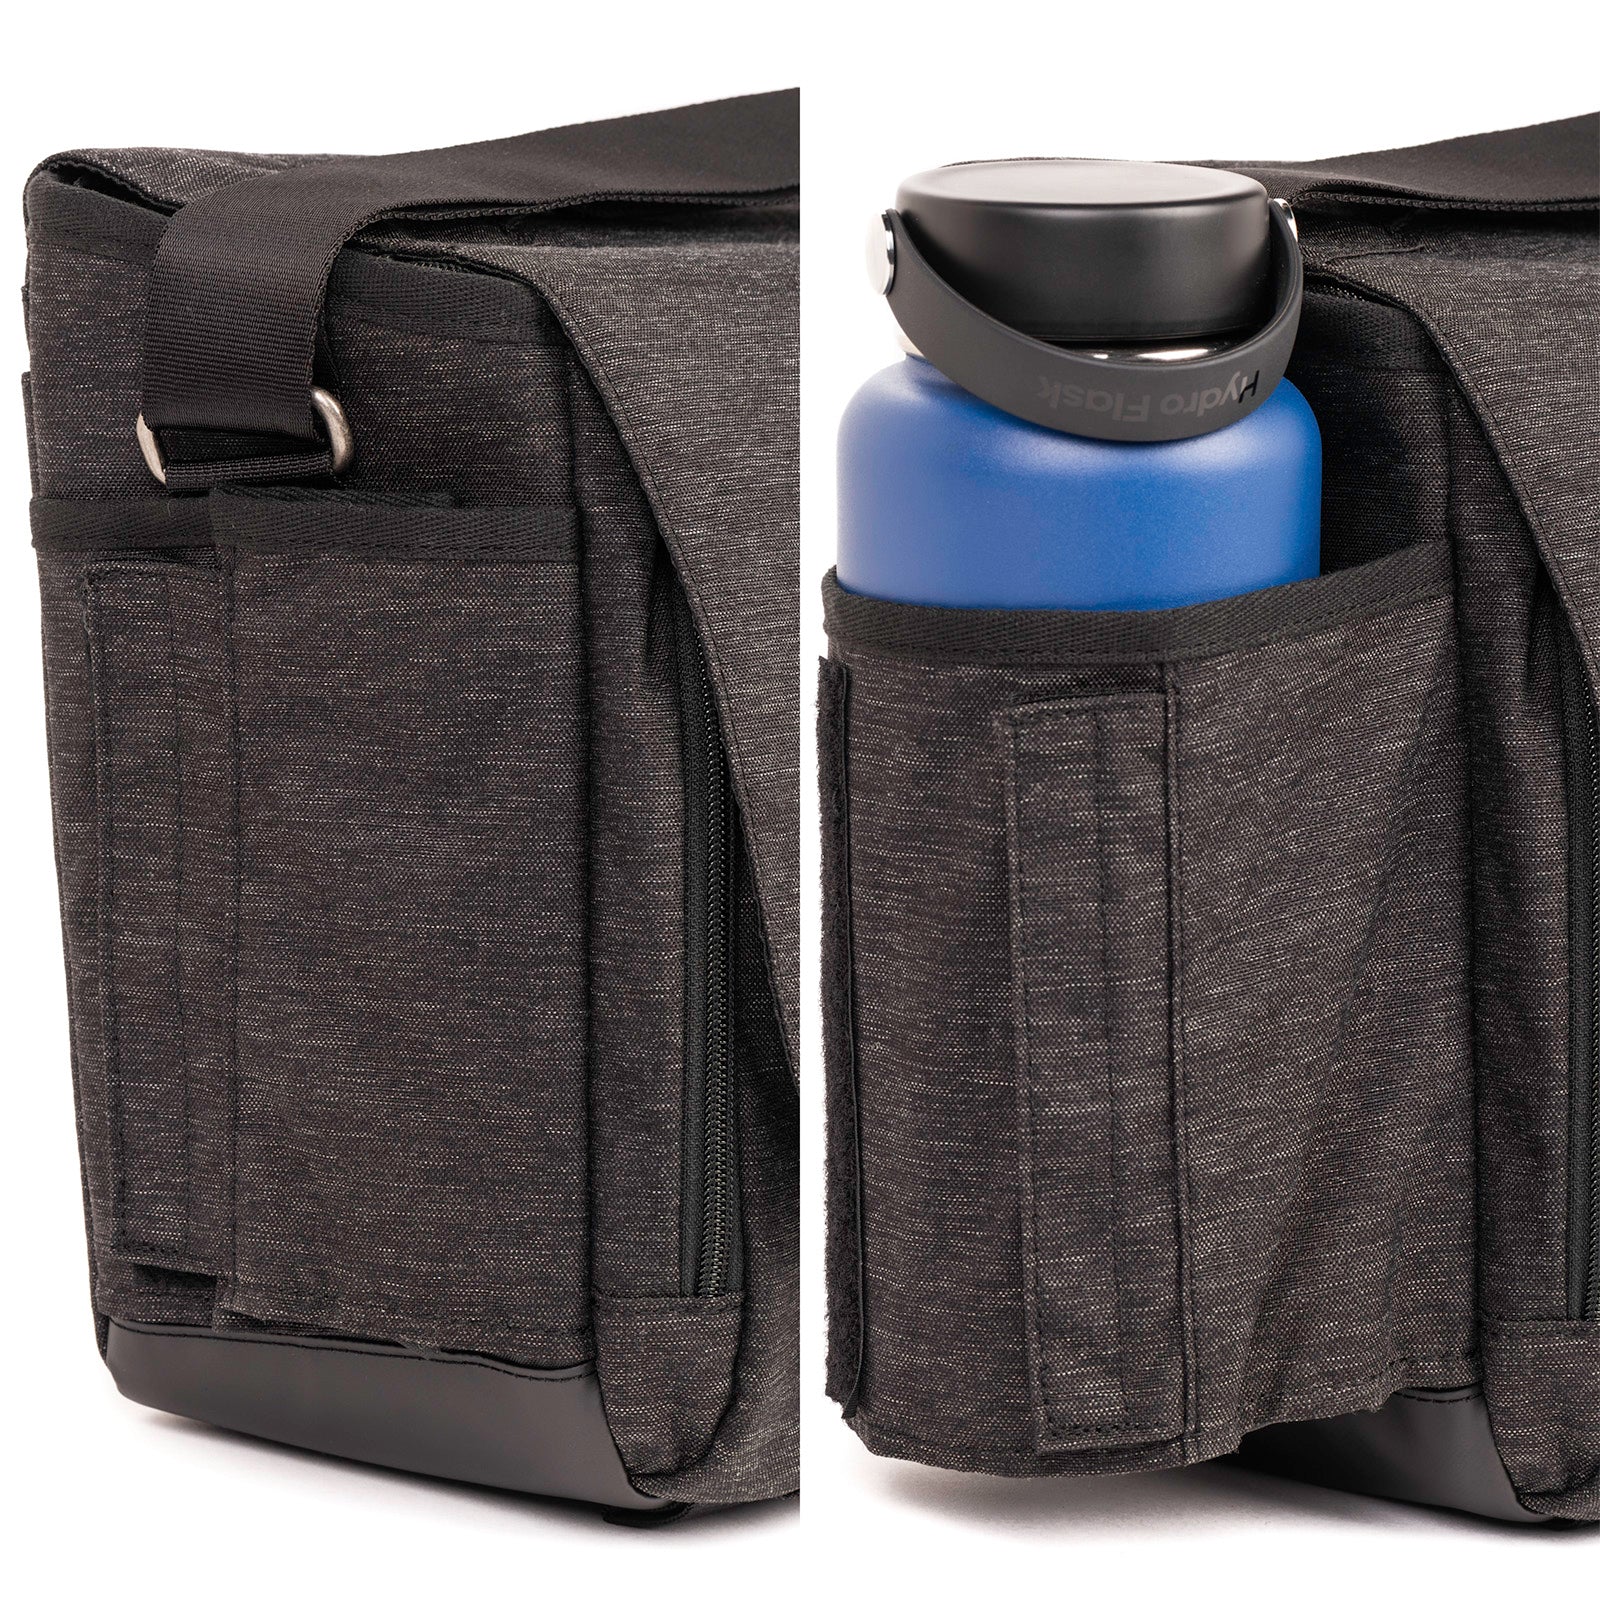 Expandable water bottle pocket fits all sizes and bottles of gear